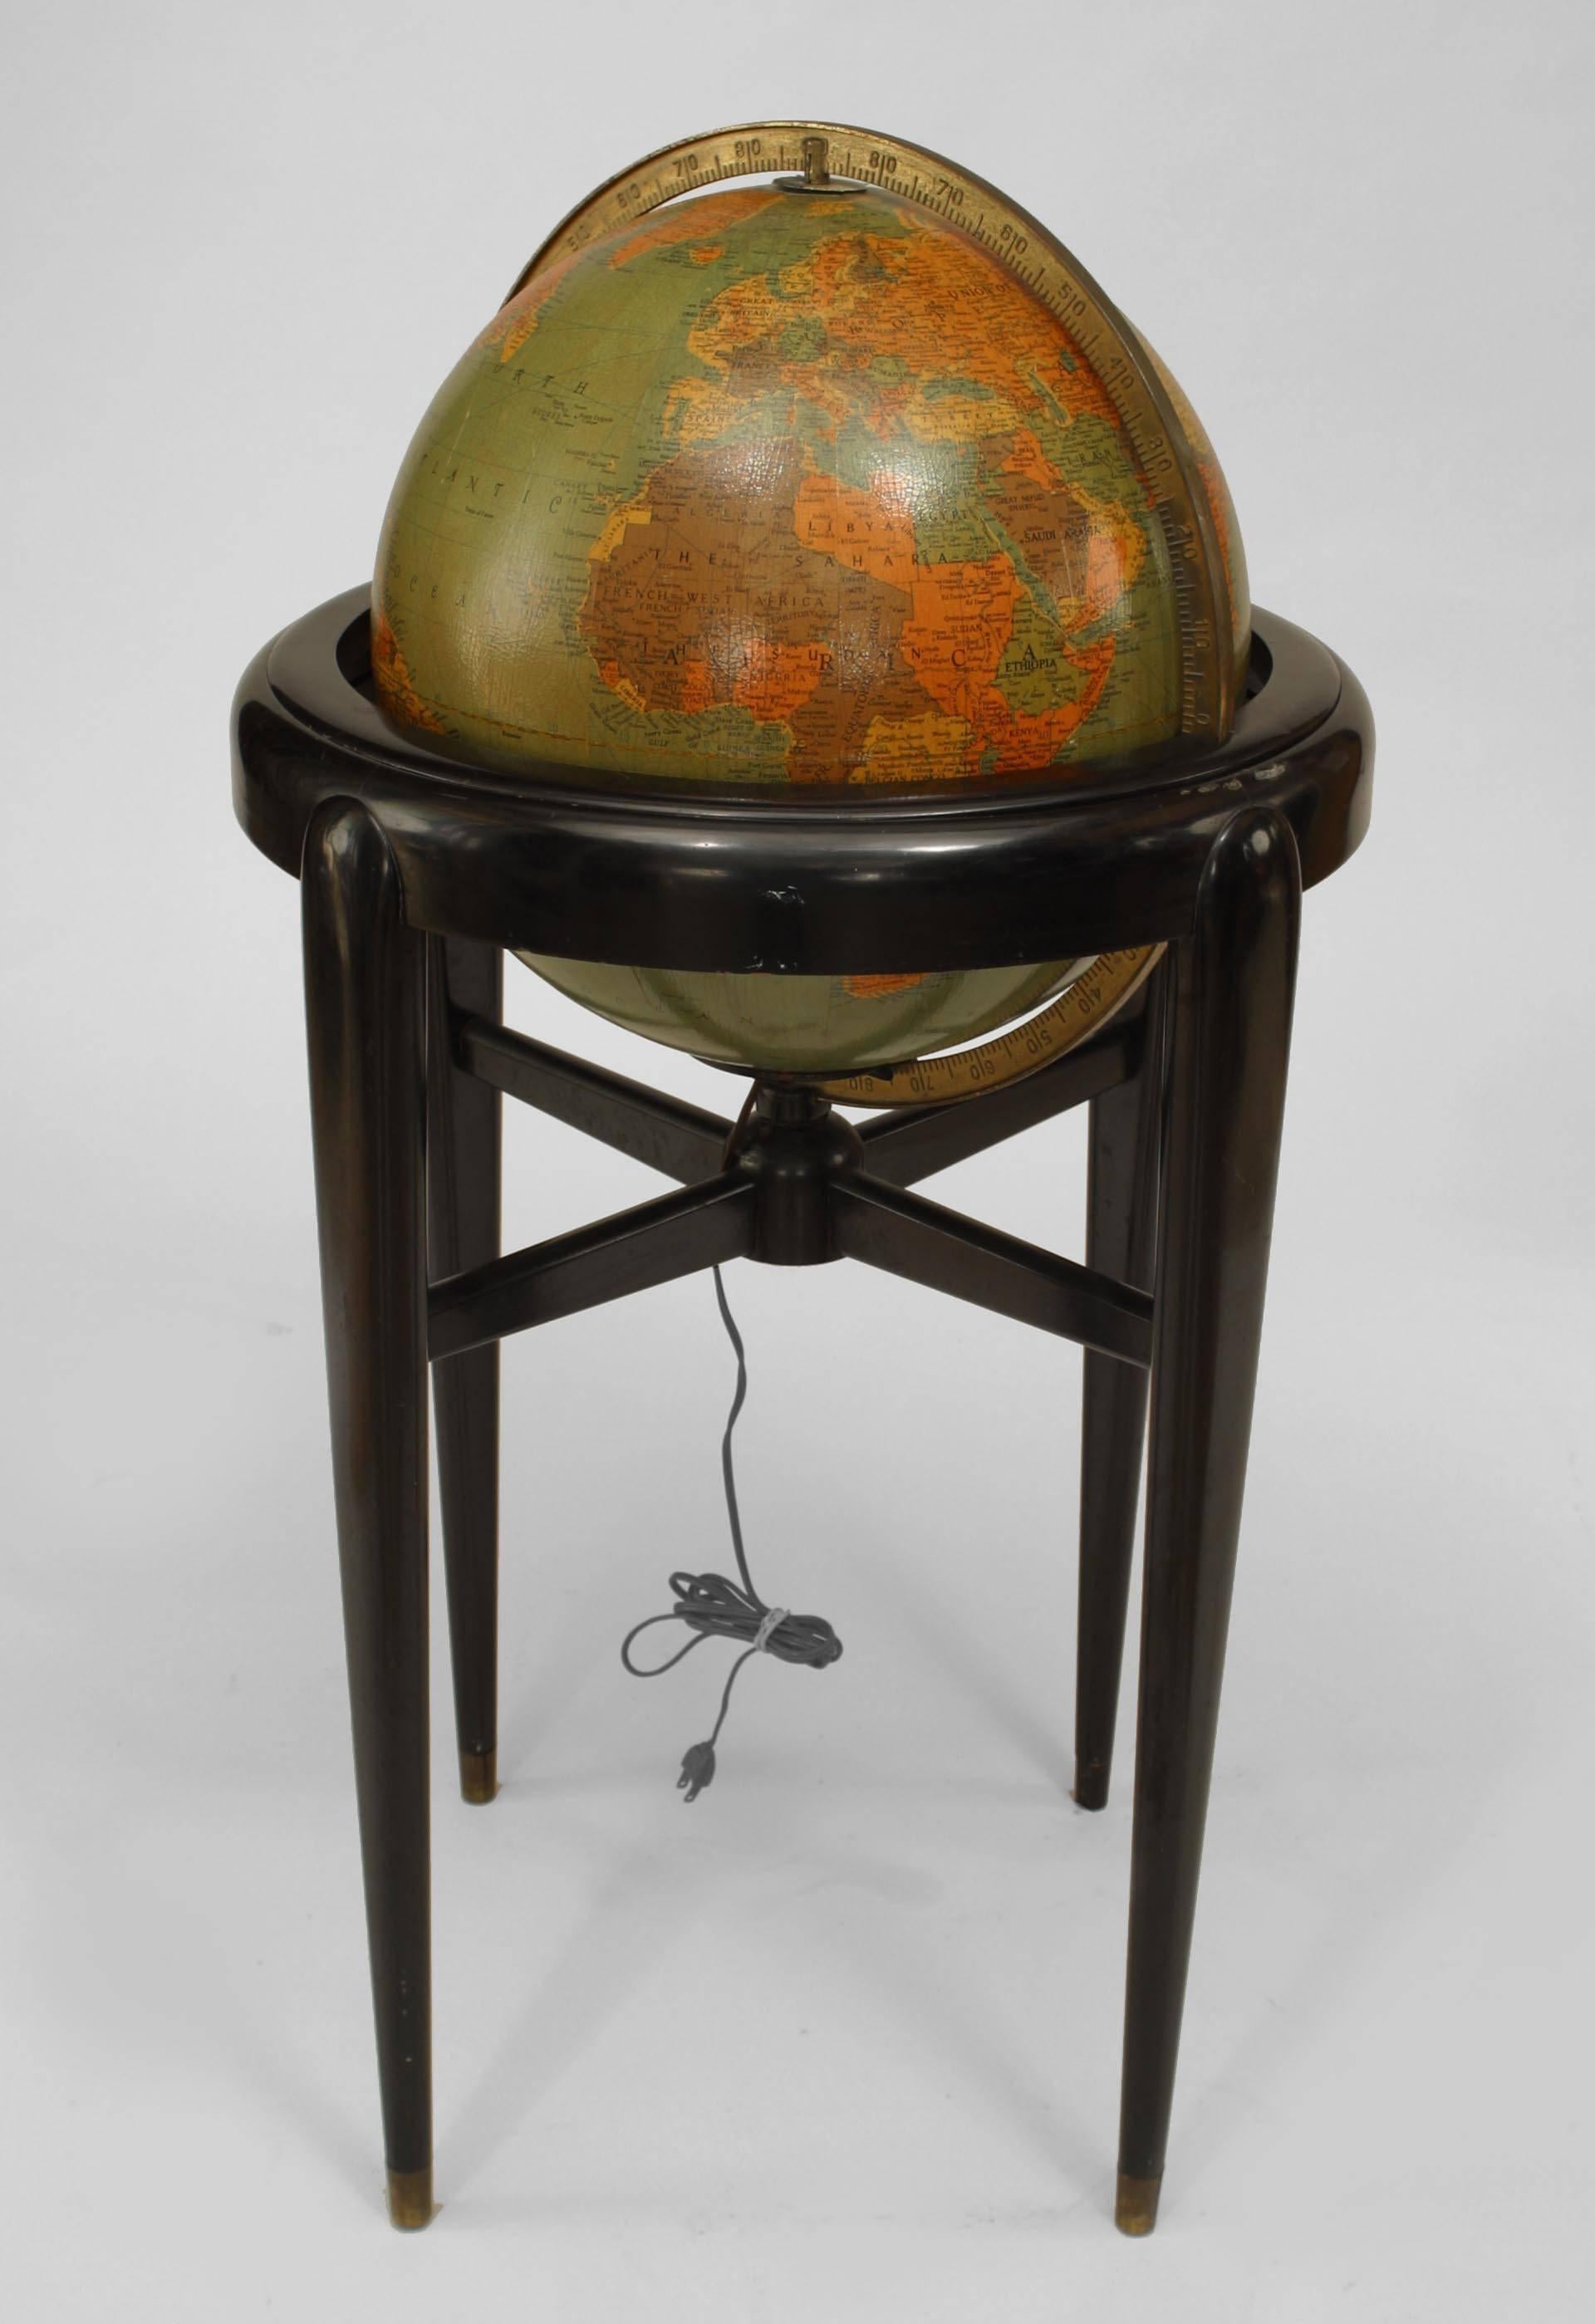 American Art Deco (Pre-WWII) globe of the world with an internal light resting in an ebonized wood Stand (made by Replogle Globes, INC, Chicago, IL).